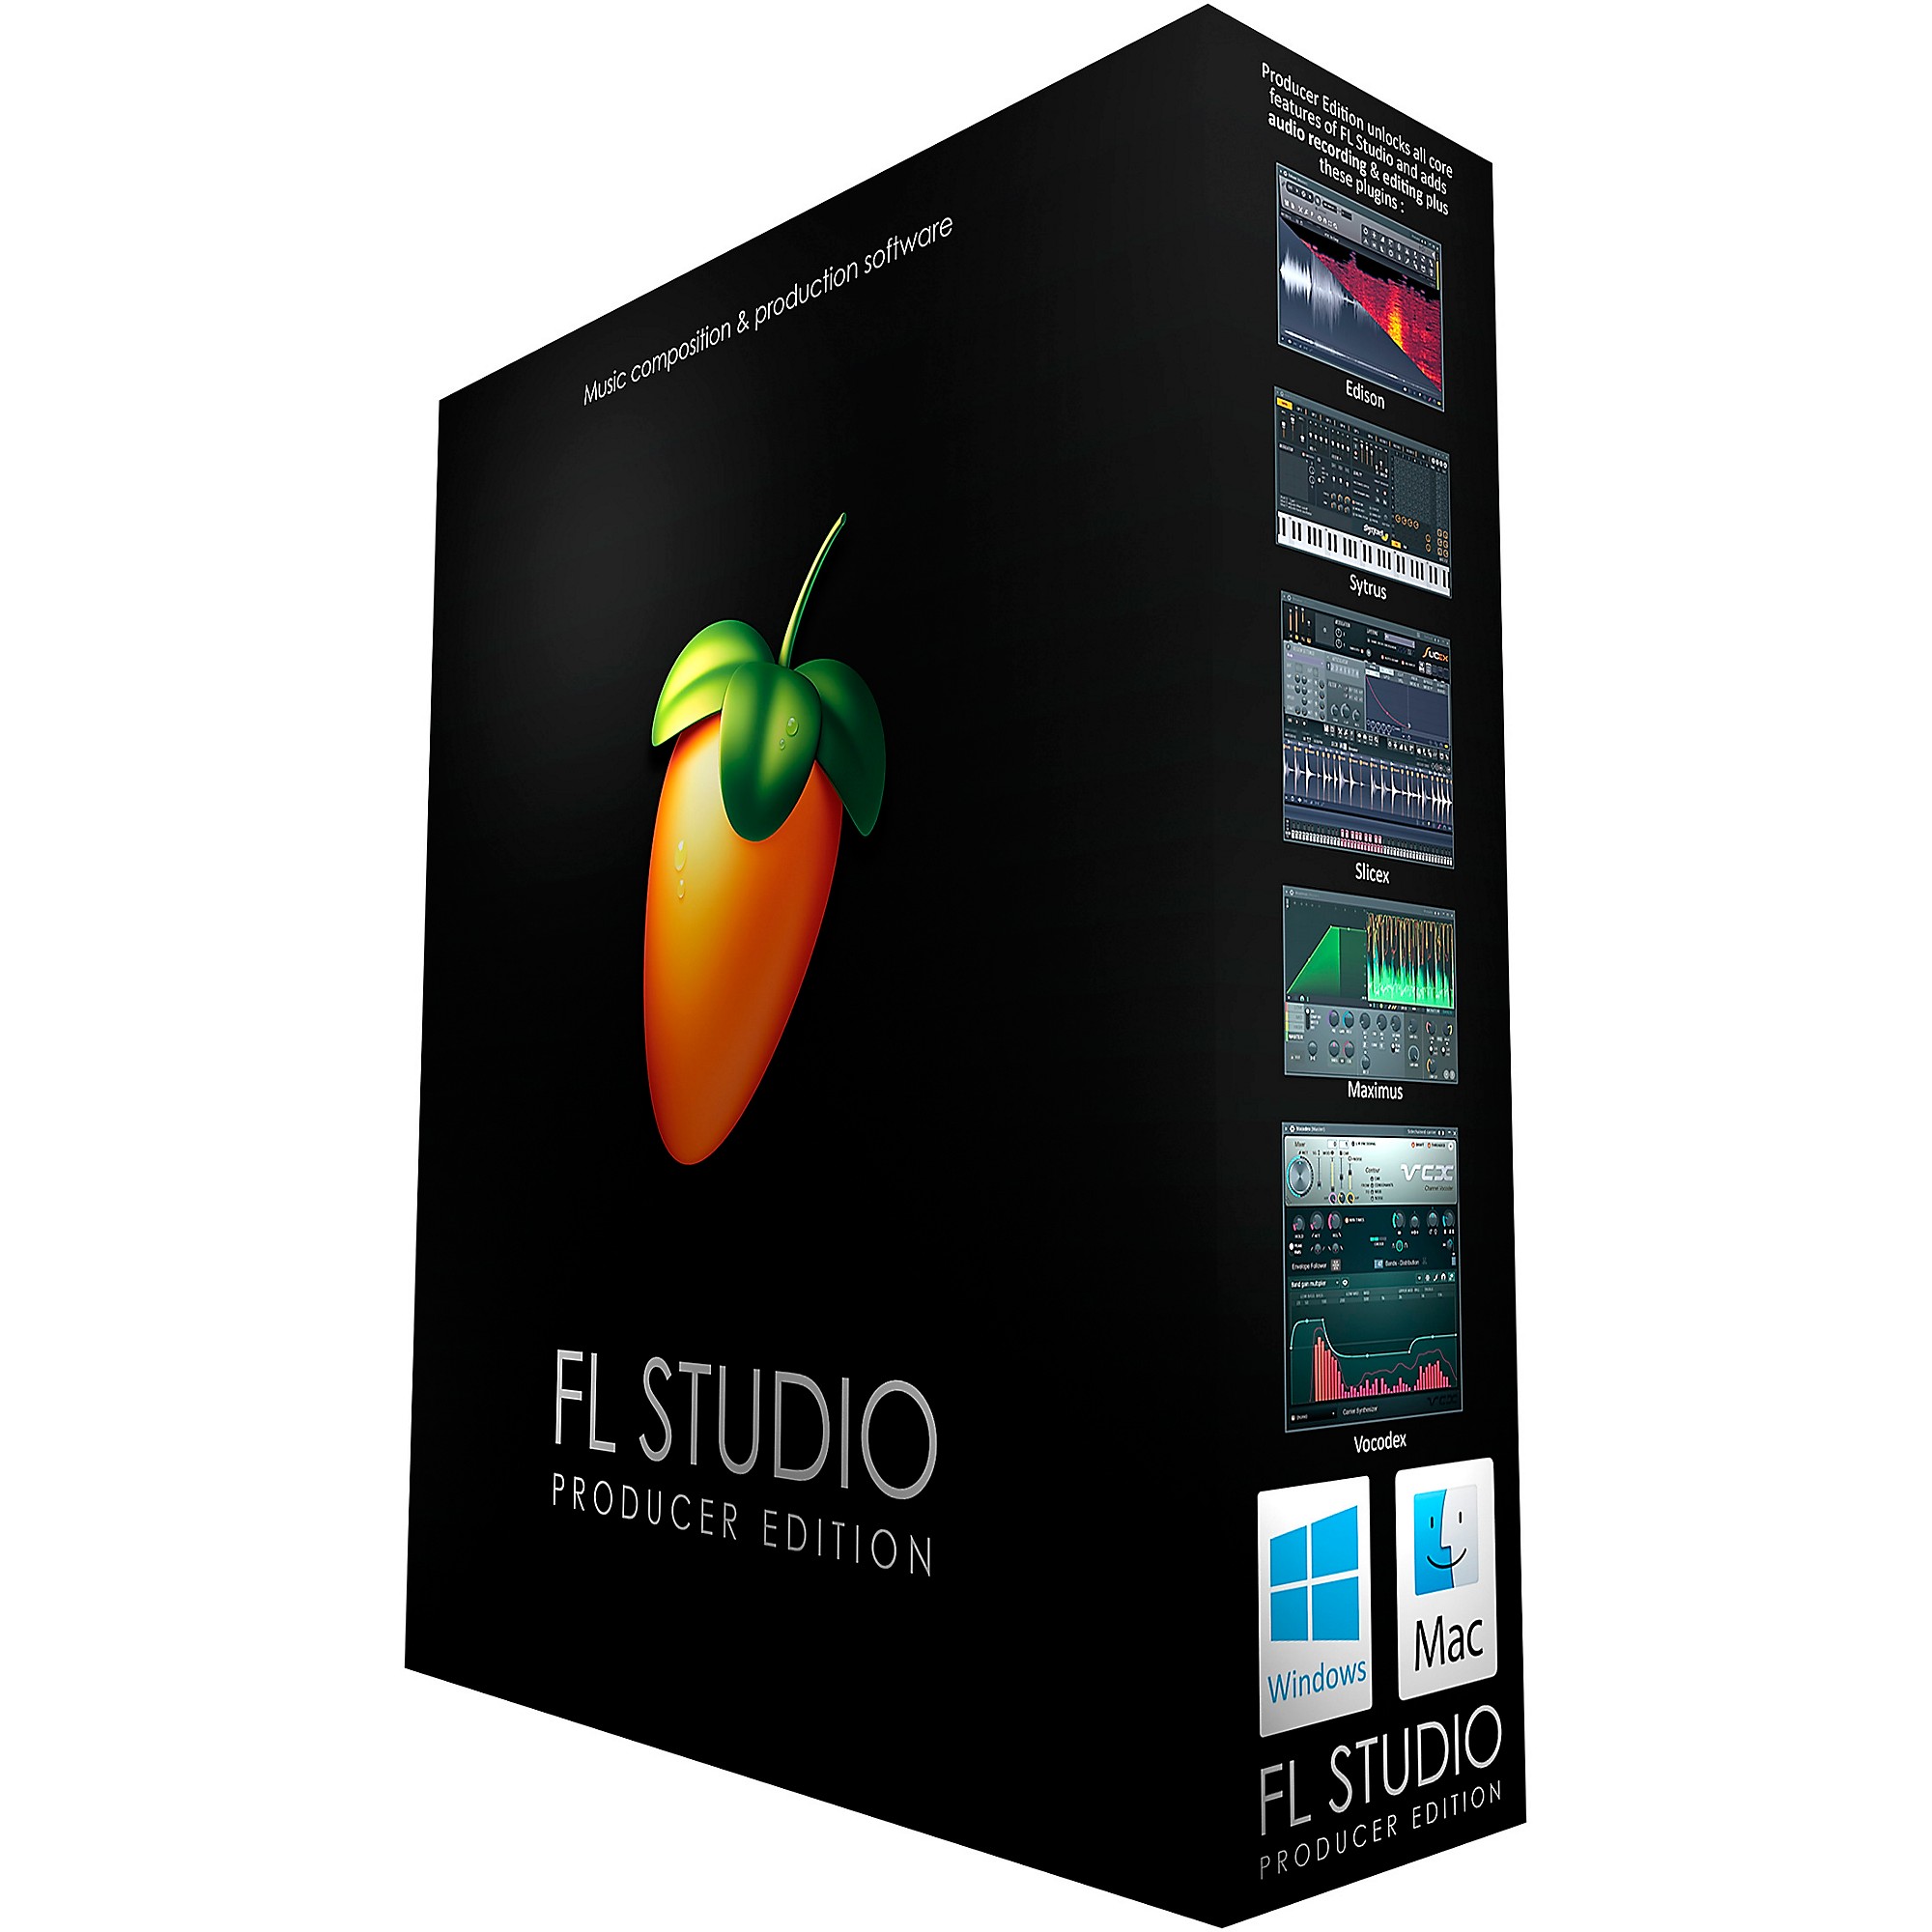 fruity loops 9 cost